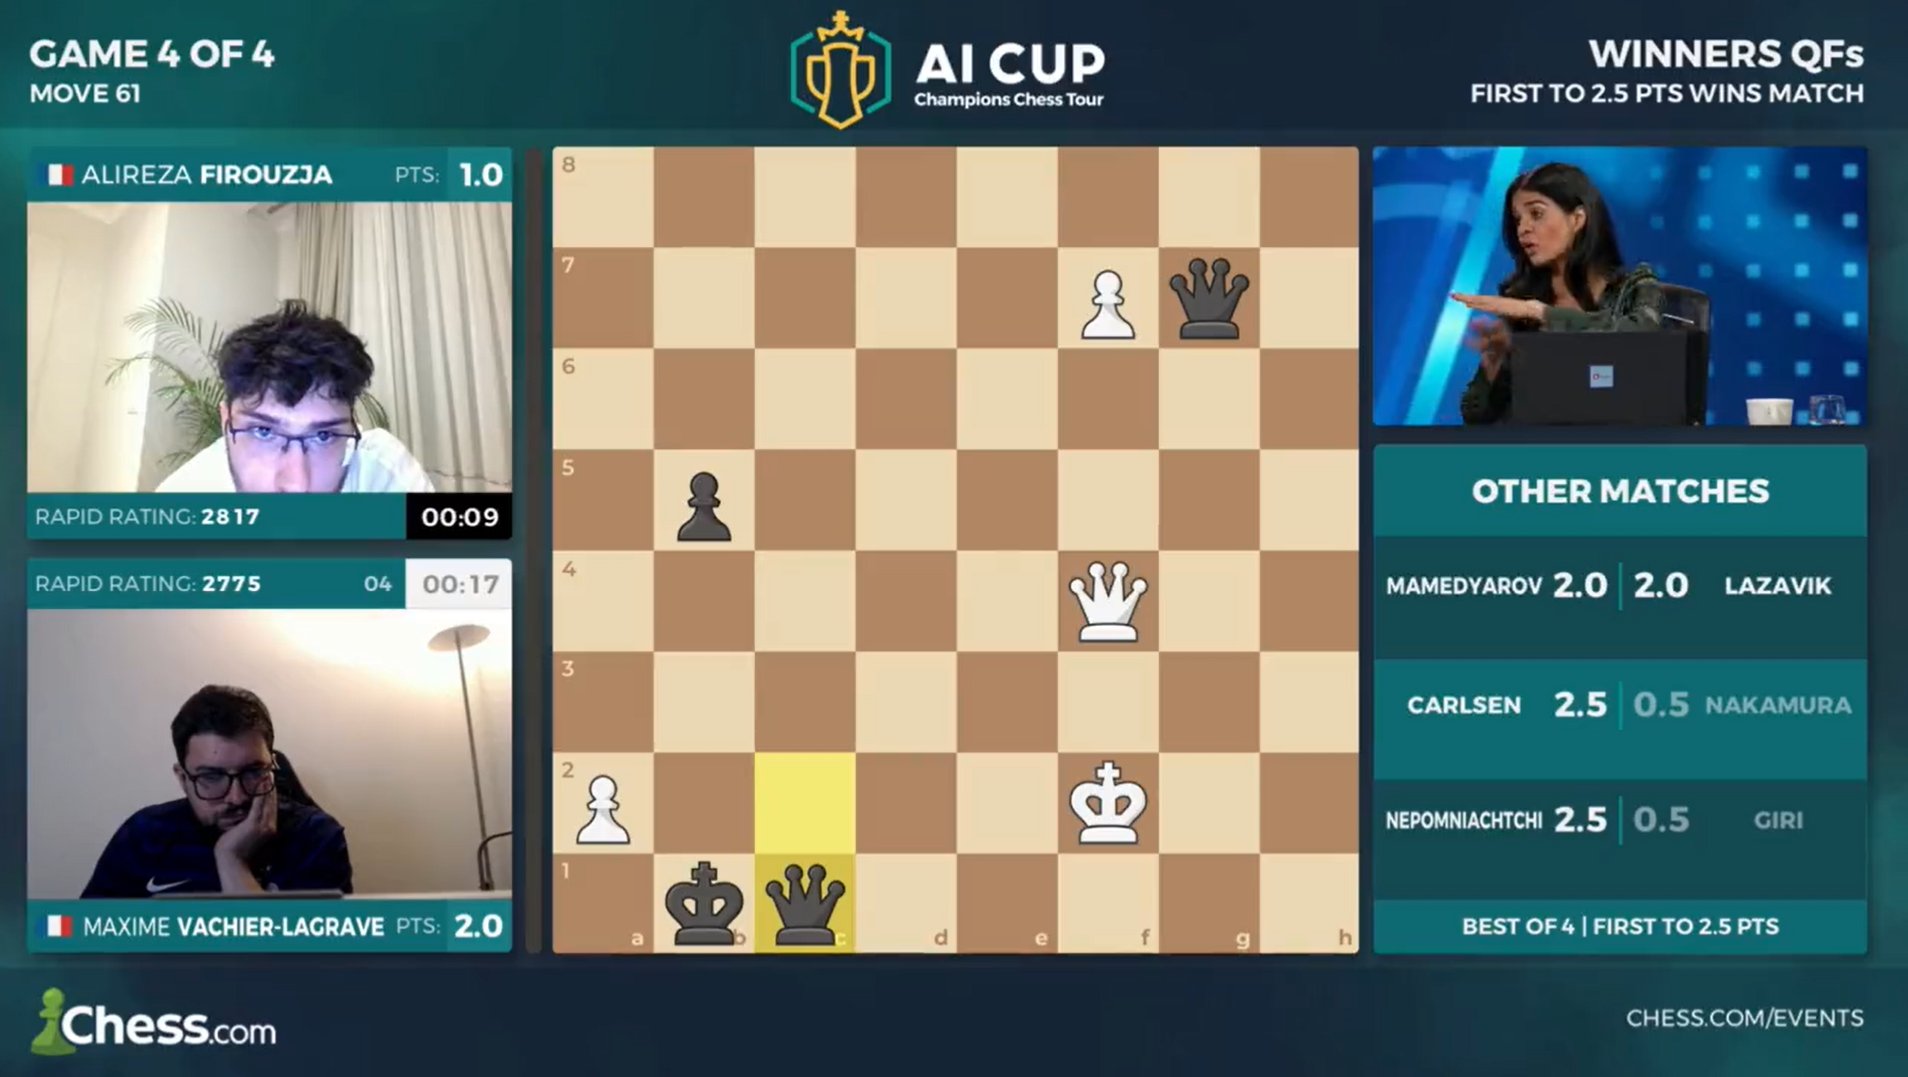 Carlsen vs. Nakamura: Clash of Chess Titans in AI Cup 2023